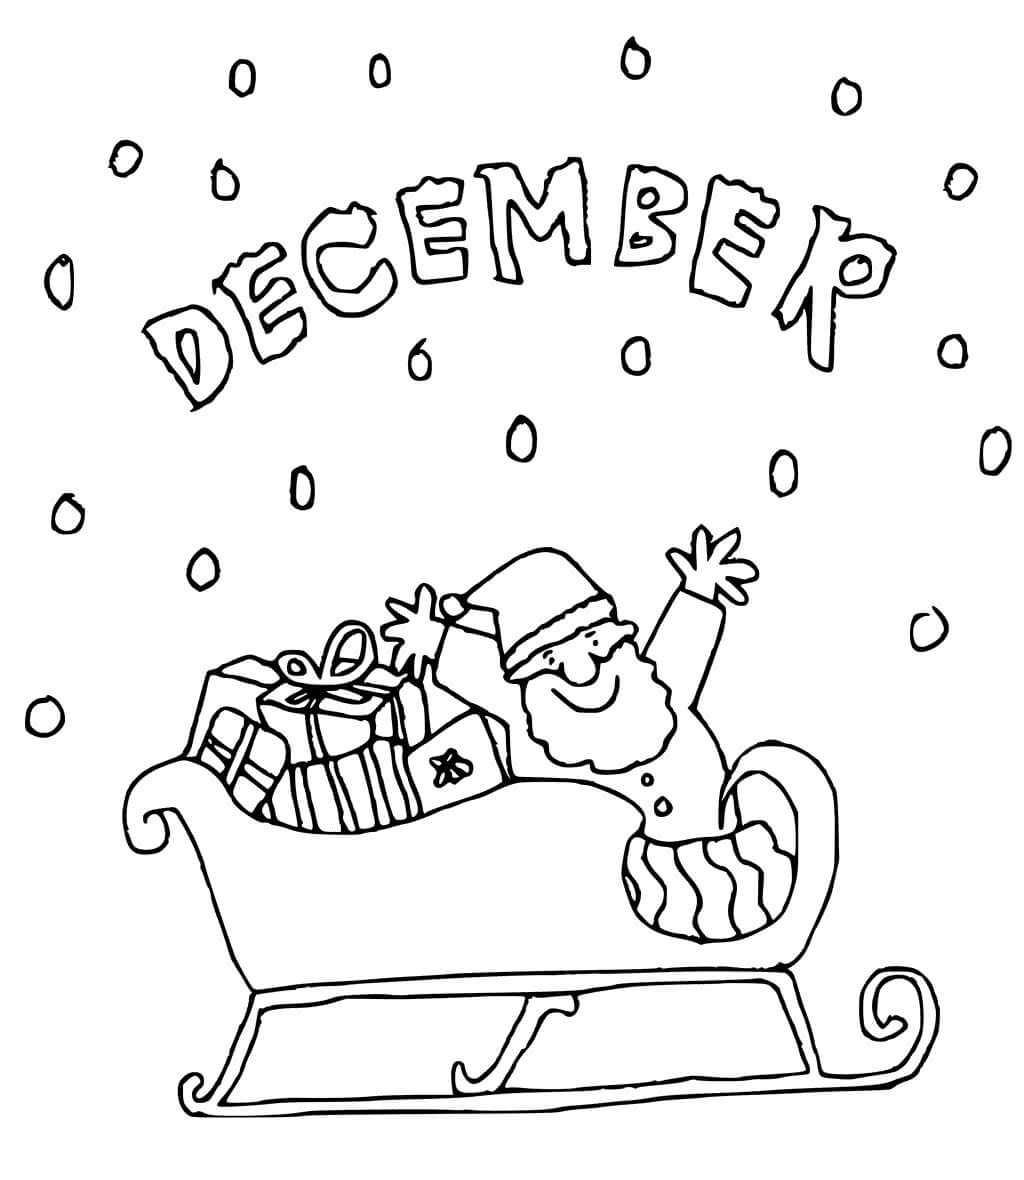 Santa And December Coloring Page Free Printable Coloring Pages For Kids